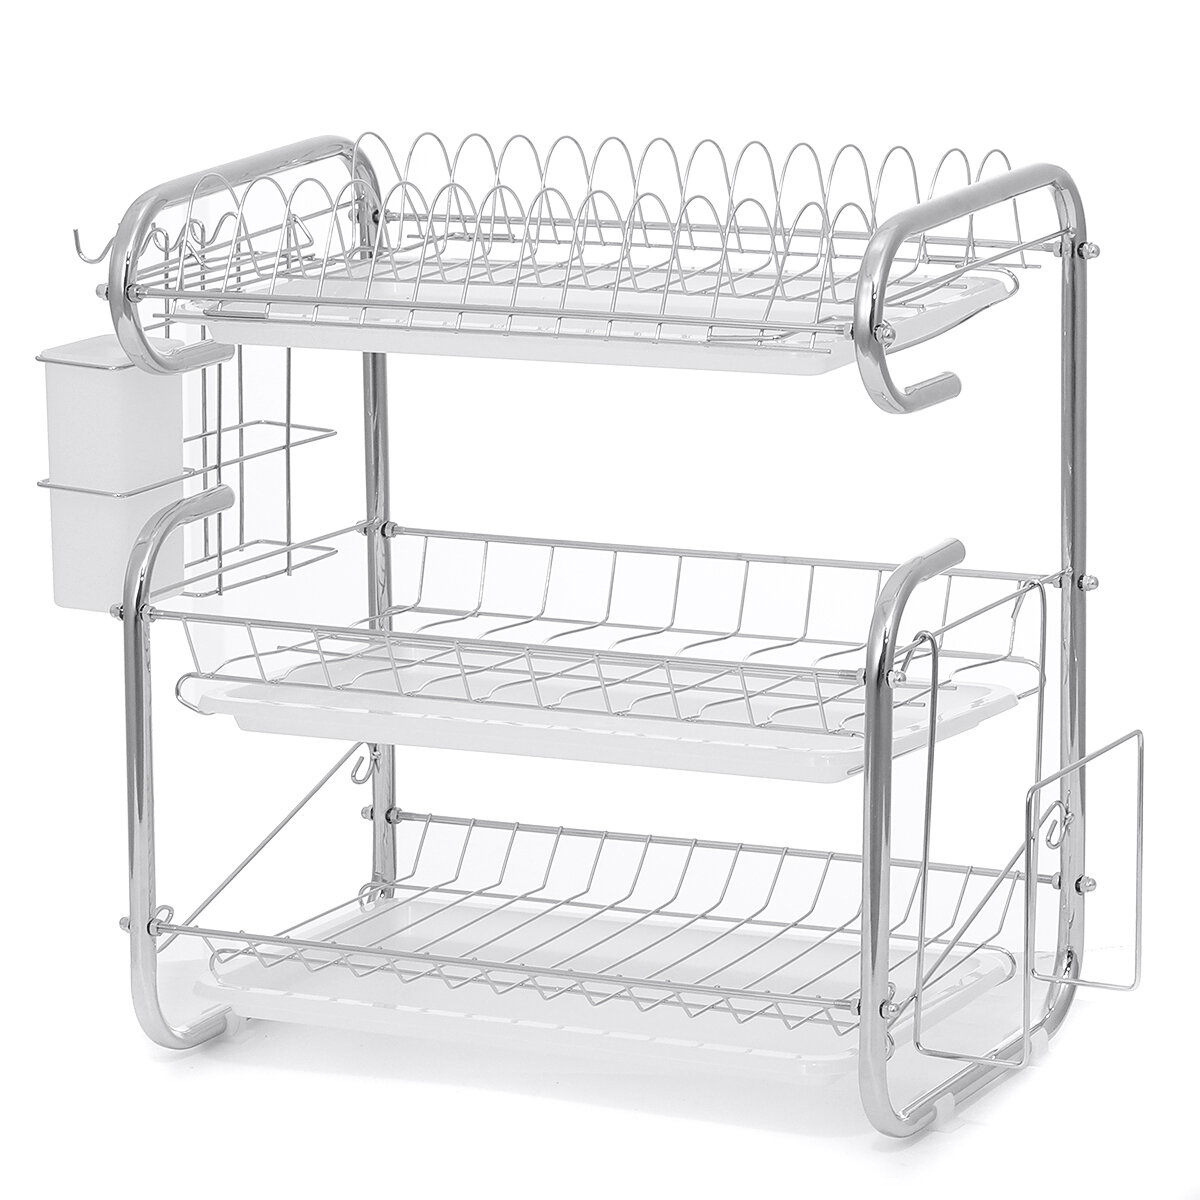 Image of 3 Tier Dish Drying Rack Over-the-Sink Kitchen Dish Drainer Rack Draining Board